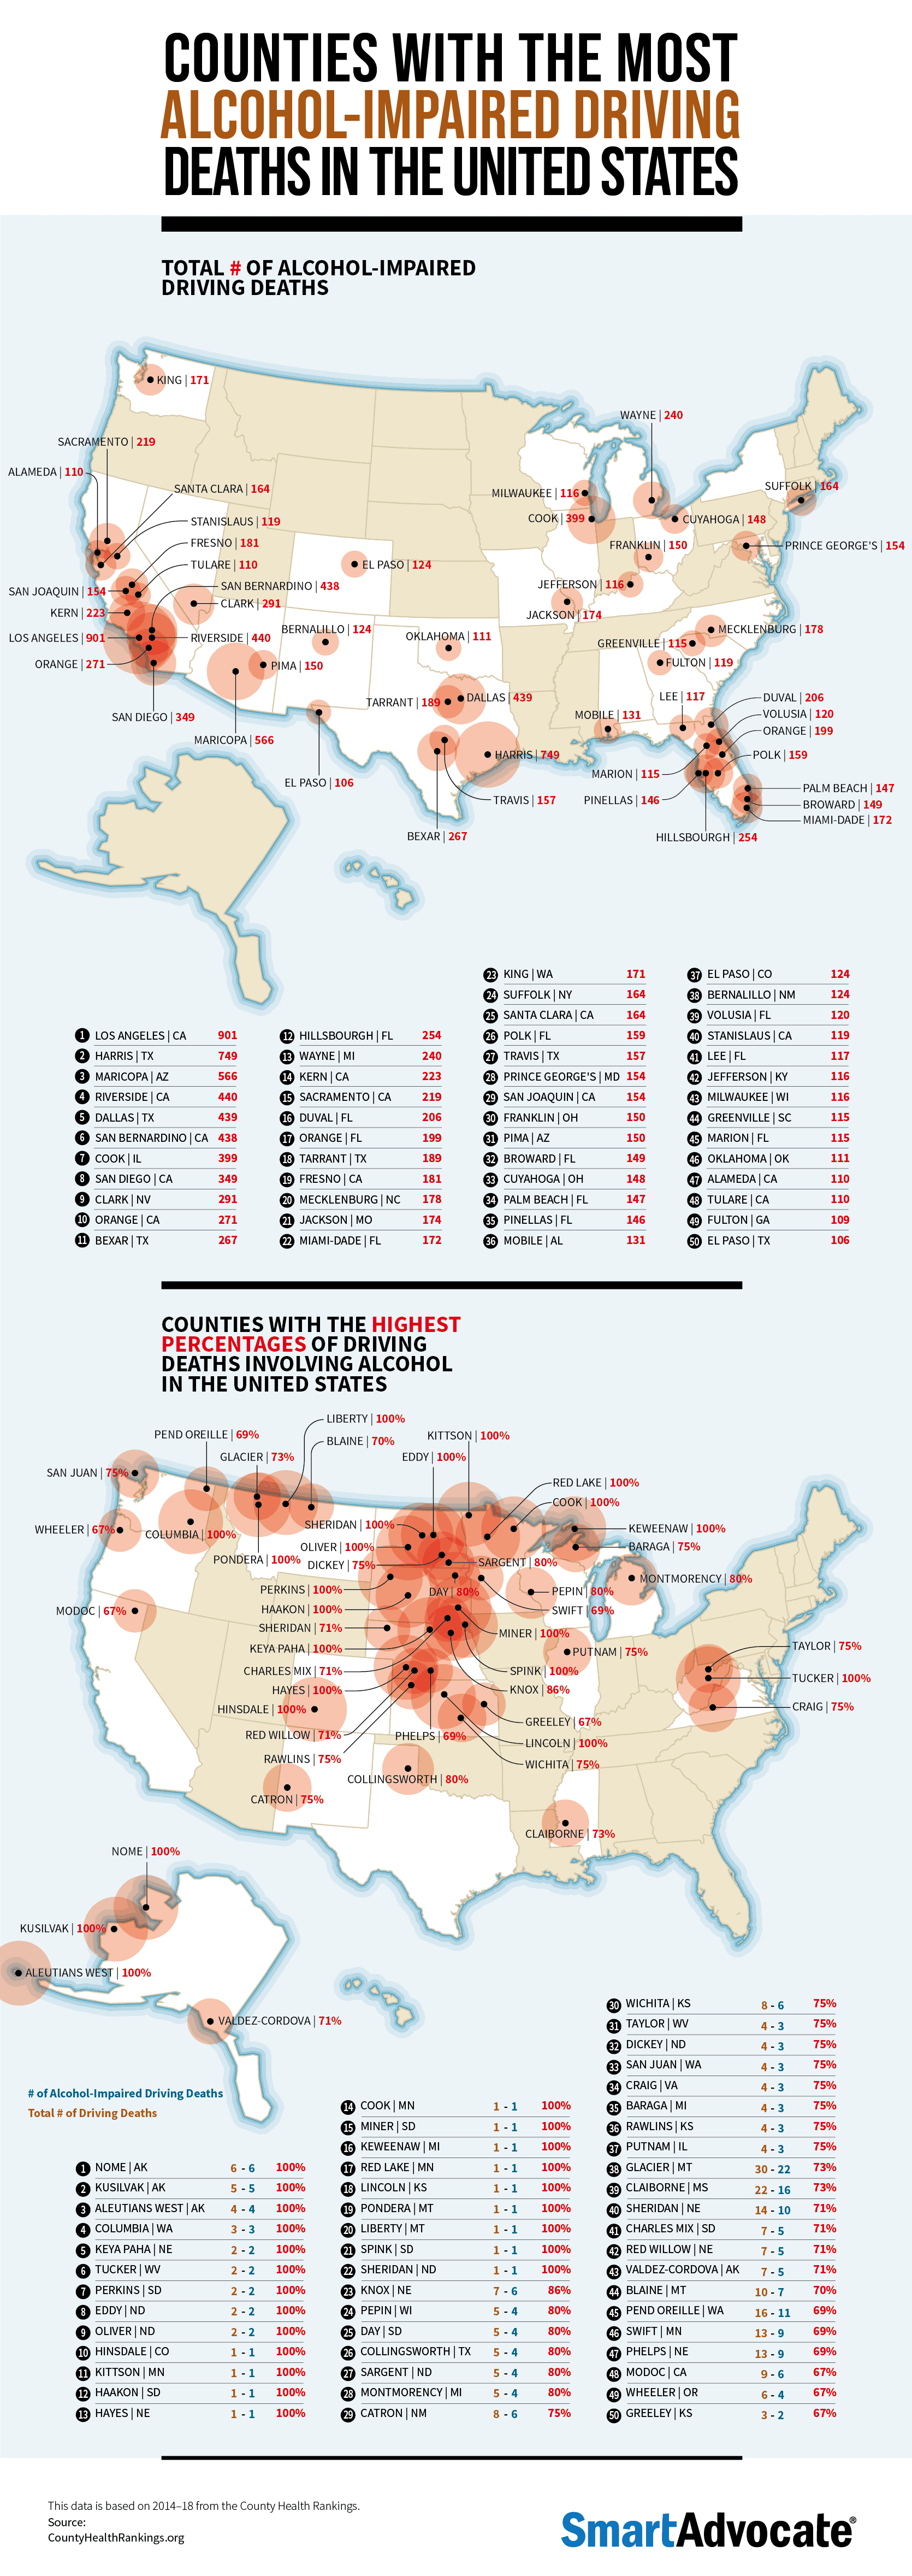 The U.S. Counties With the Most Drunk Driving Deaths